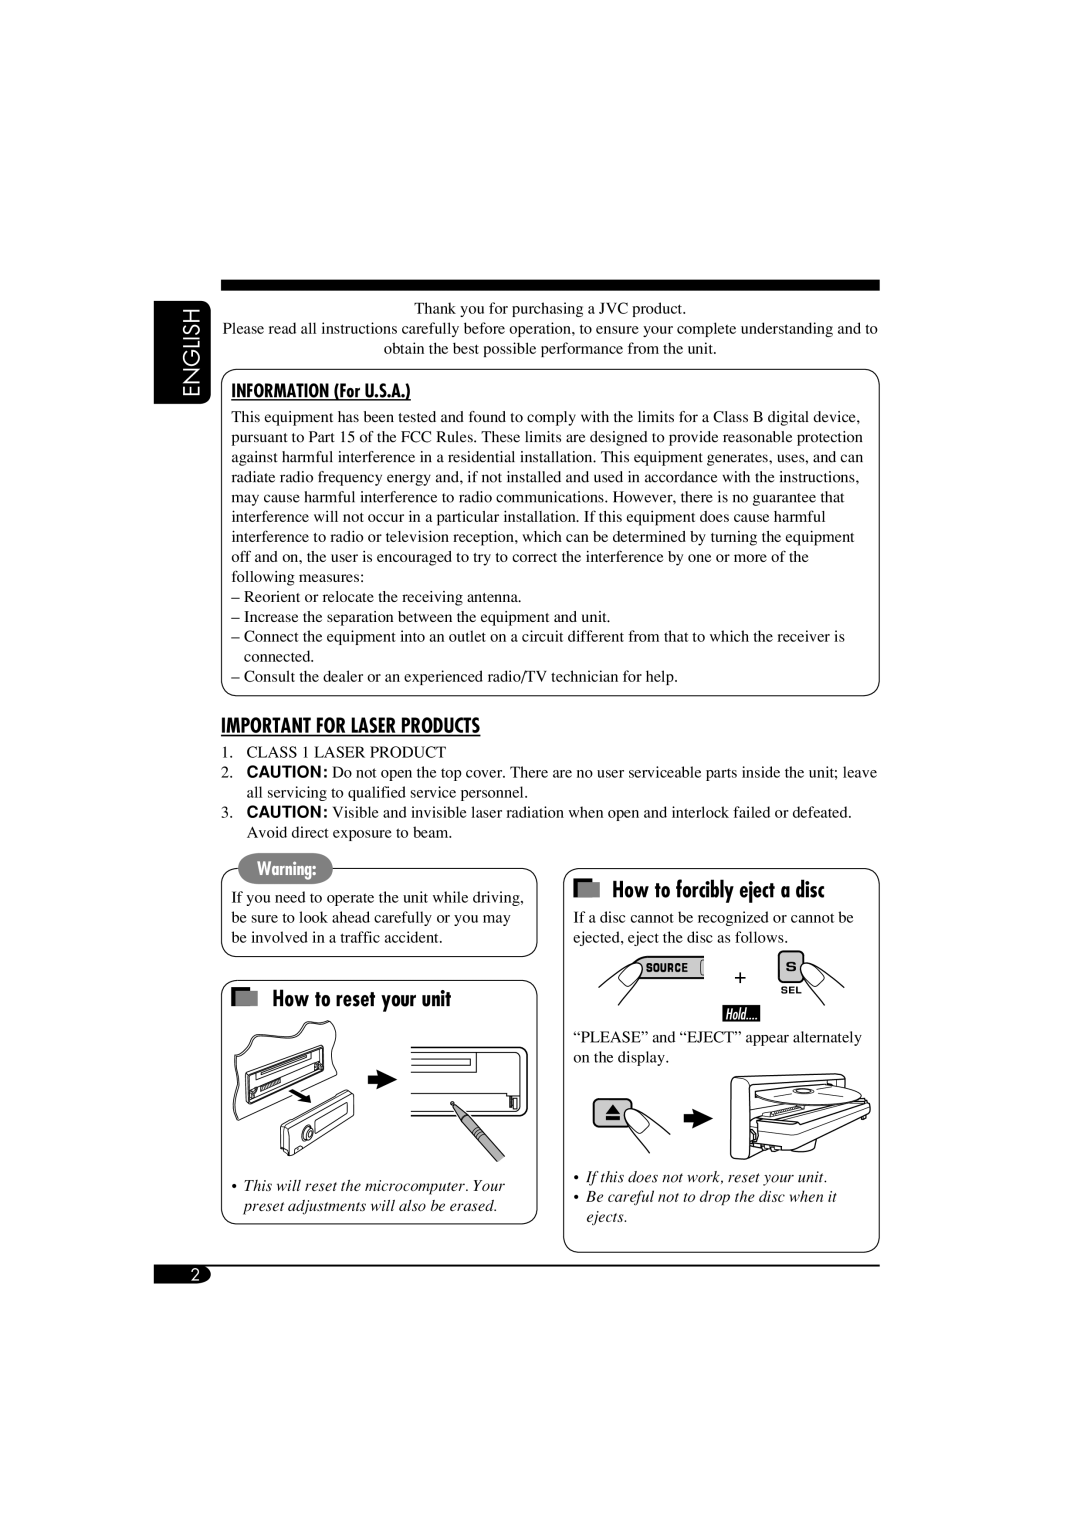 JVC KD-S52 manual English, How to reset your unit, Important For Laser Products, INFORMATION For U.S.A 